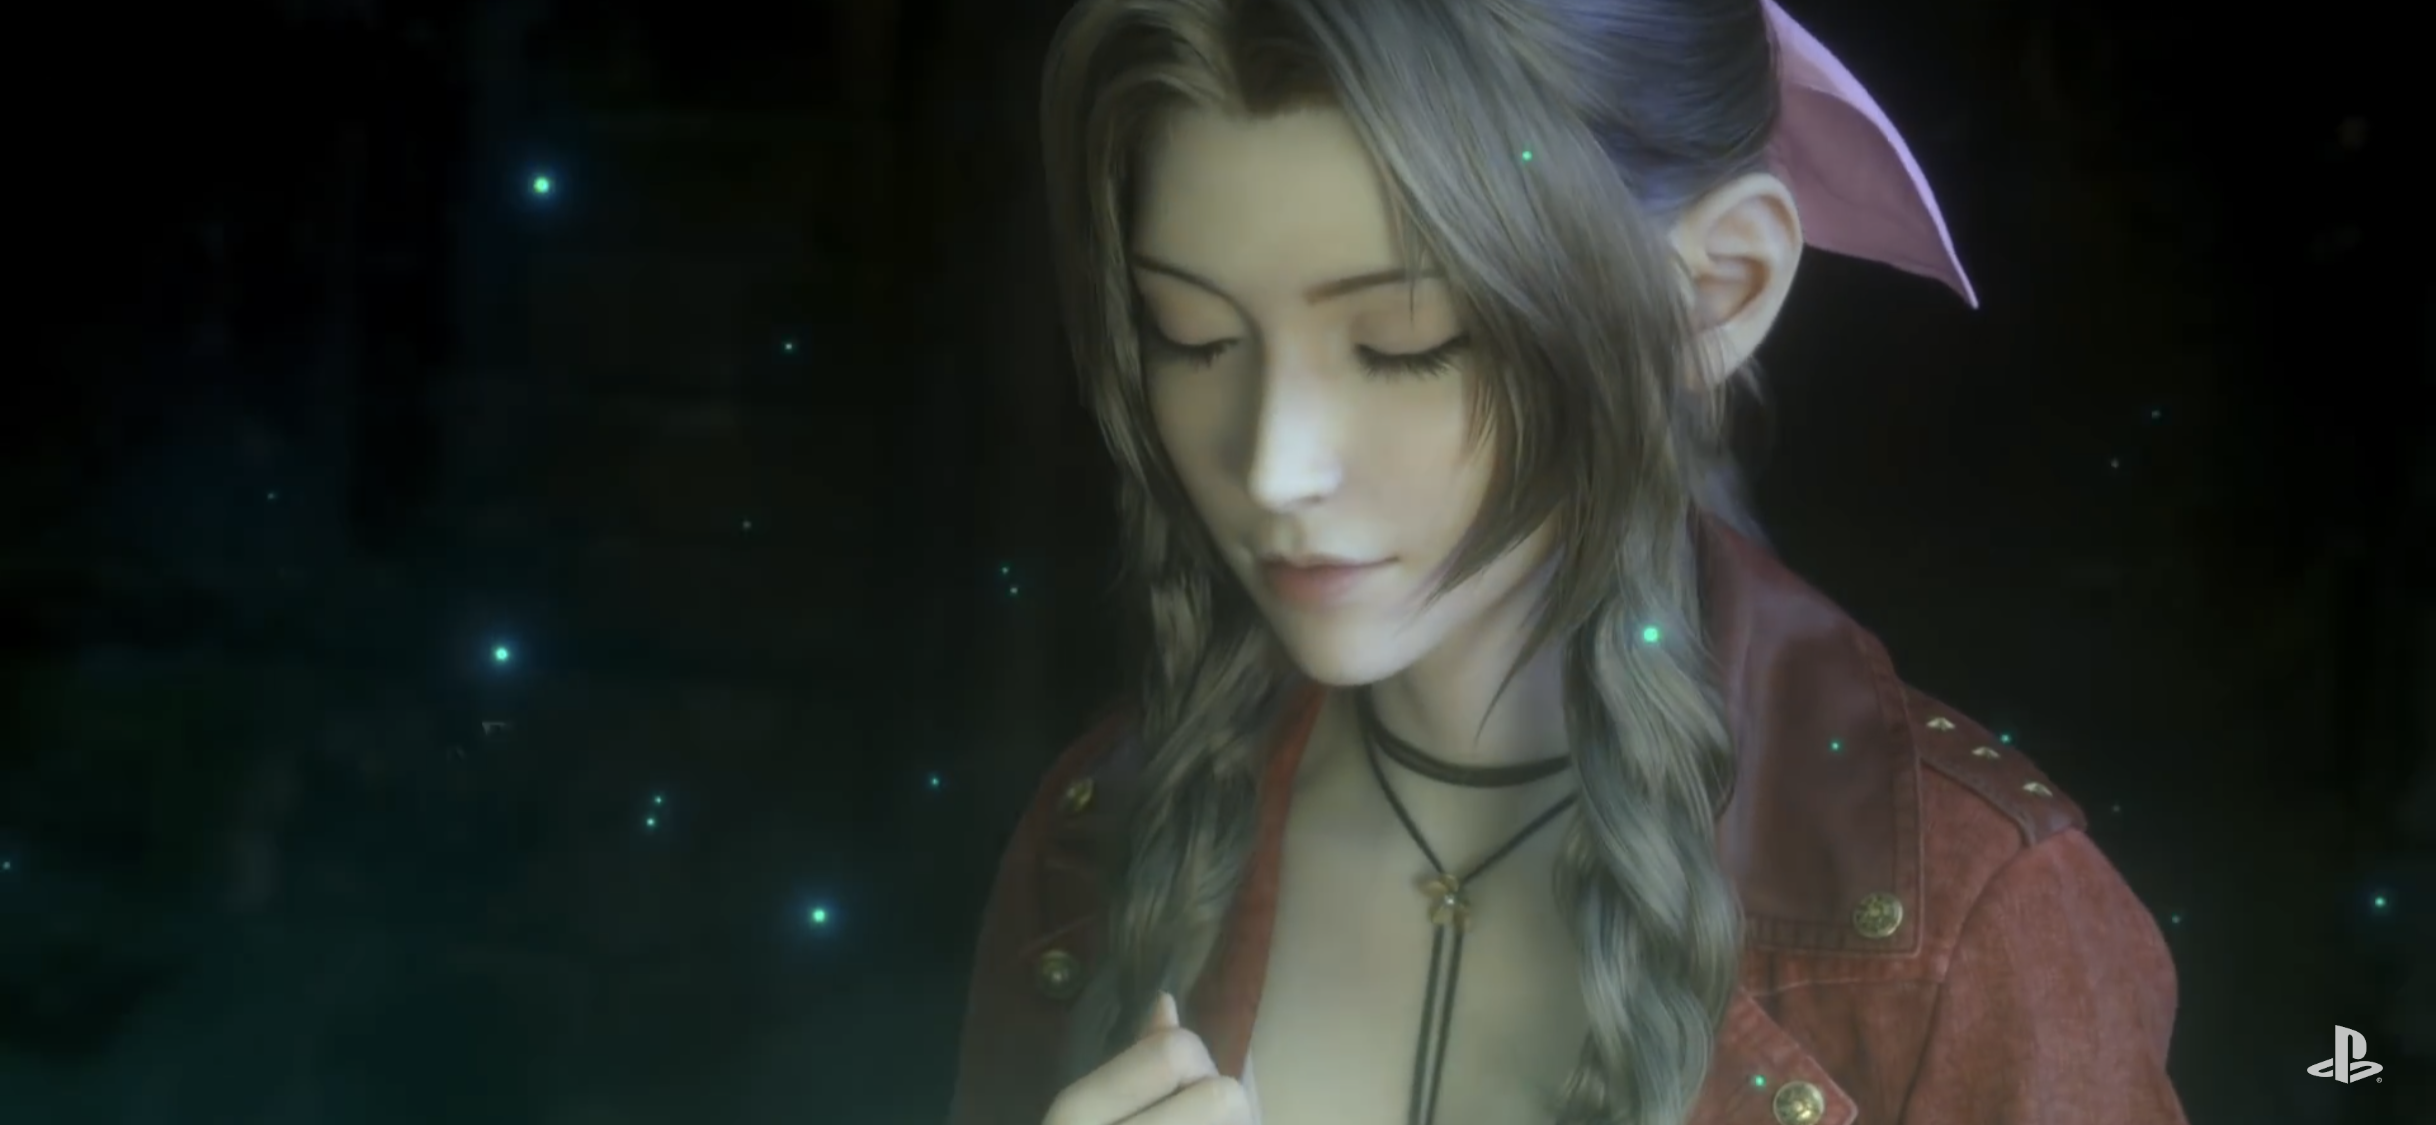 A new Final Fantasy VII Remake trailer appears